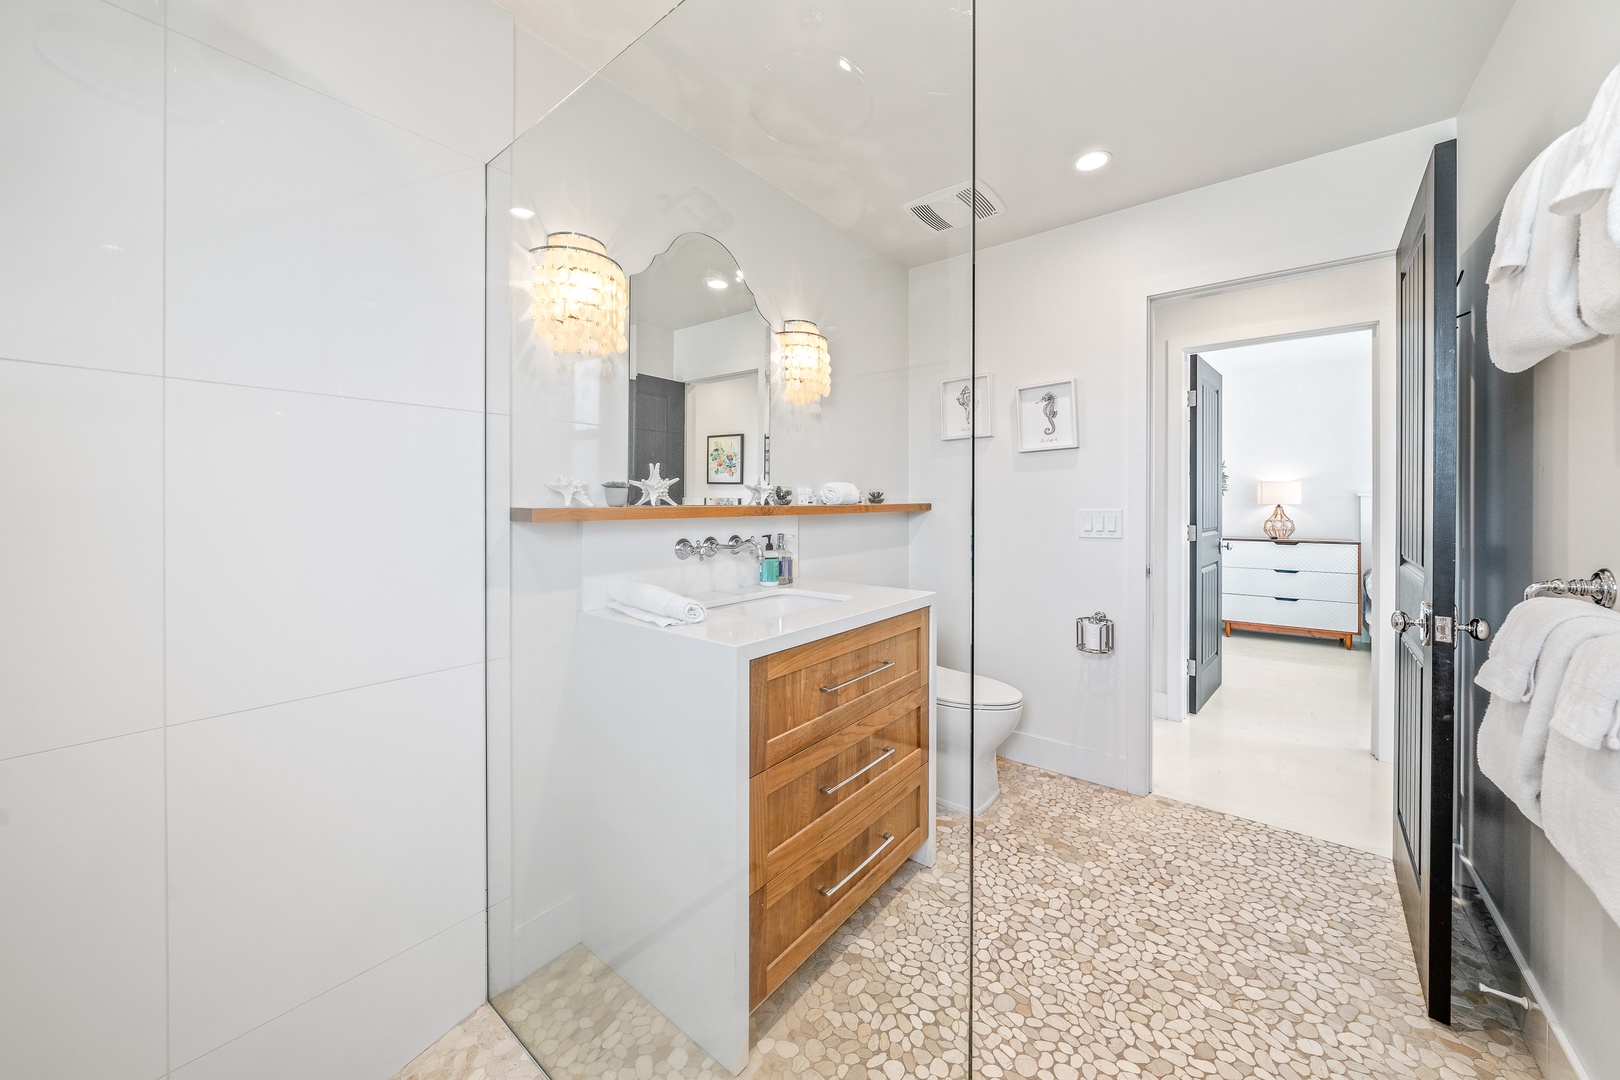 The full bathroom includes a chic single vanity & glass walk-in shower